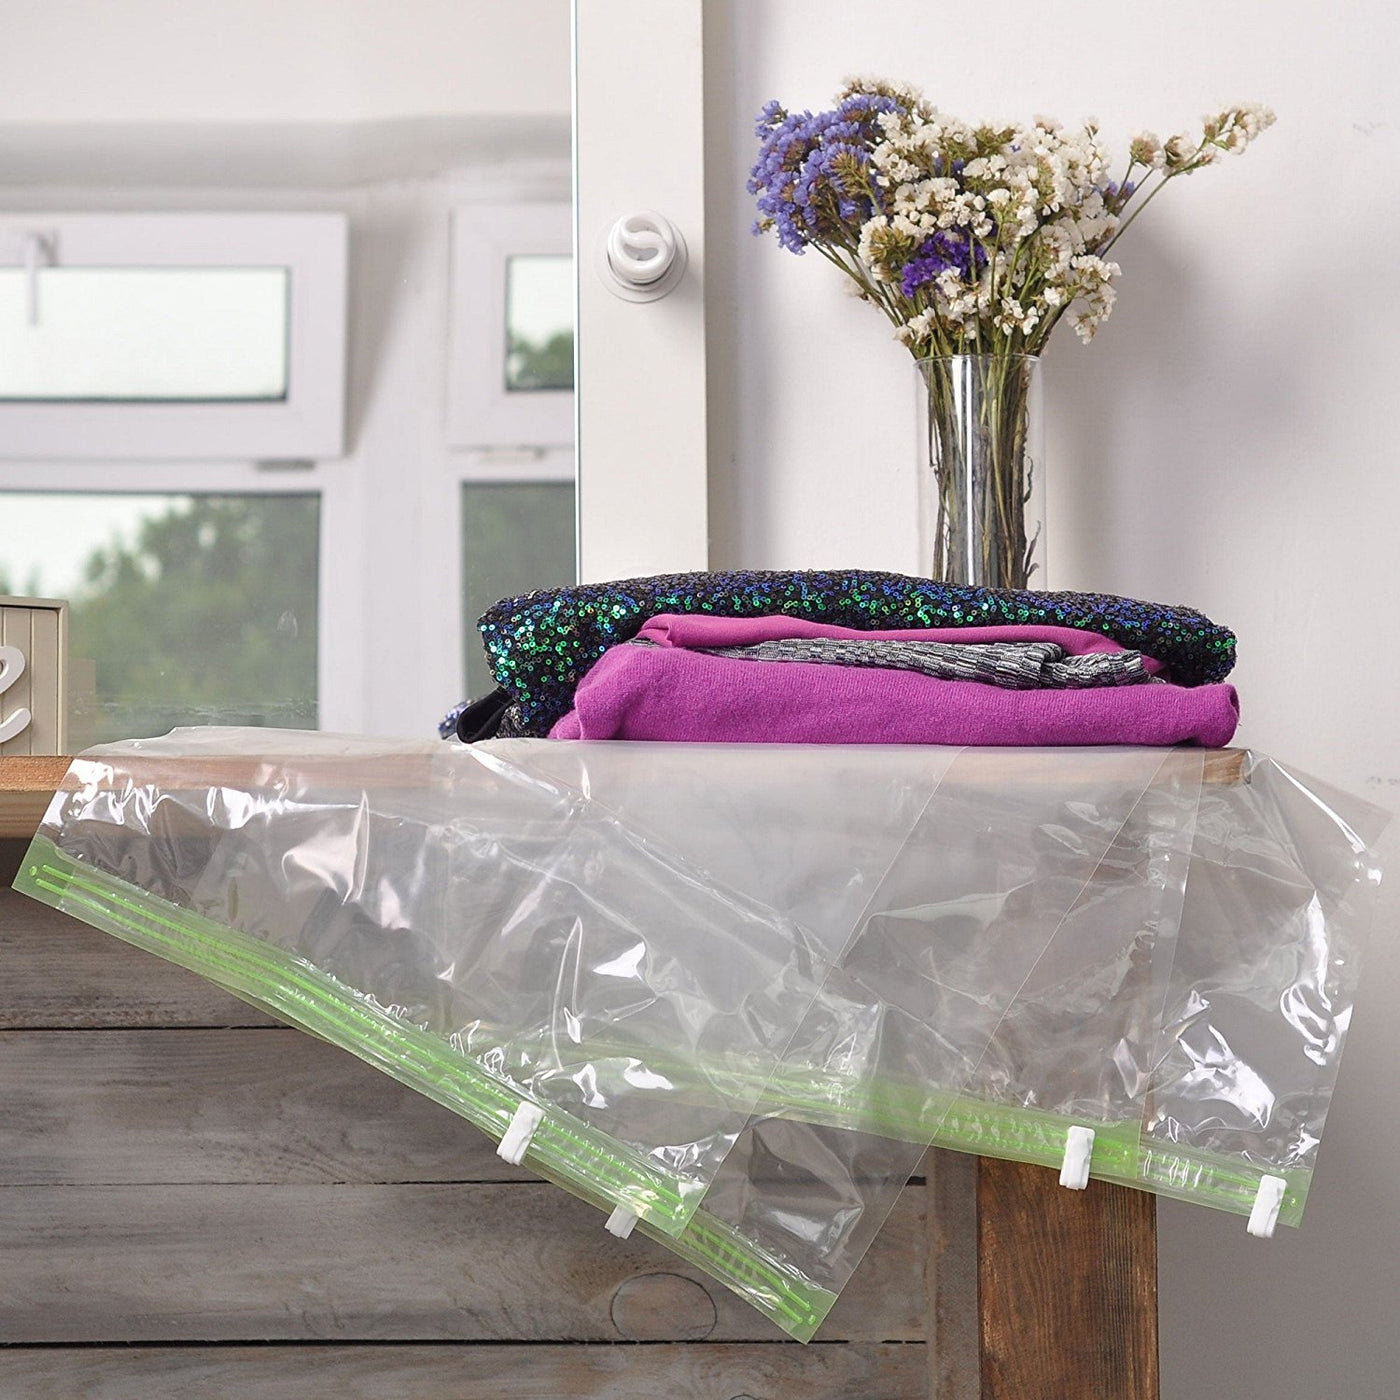 The Chestnut 12 Travel Storage Bags for Clothes - Compression, no Vacuum  Sacks - Save Space in Luggage Accessories